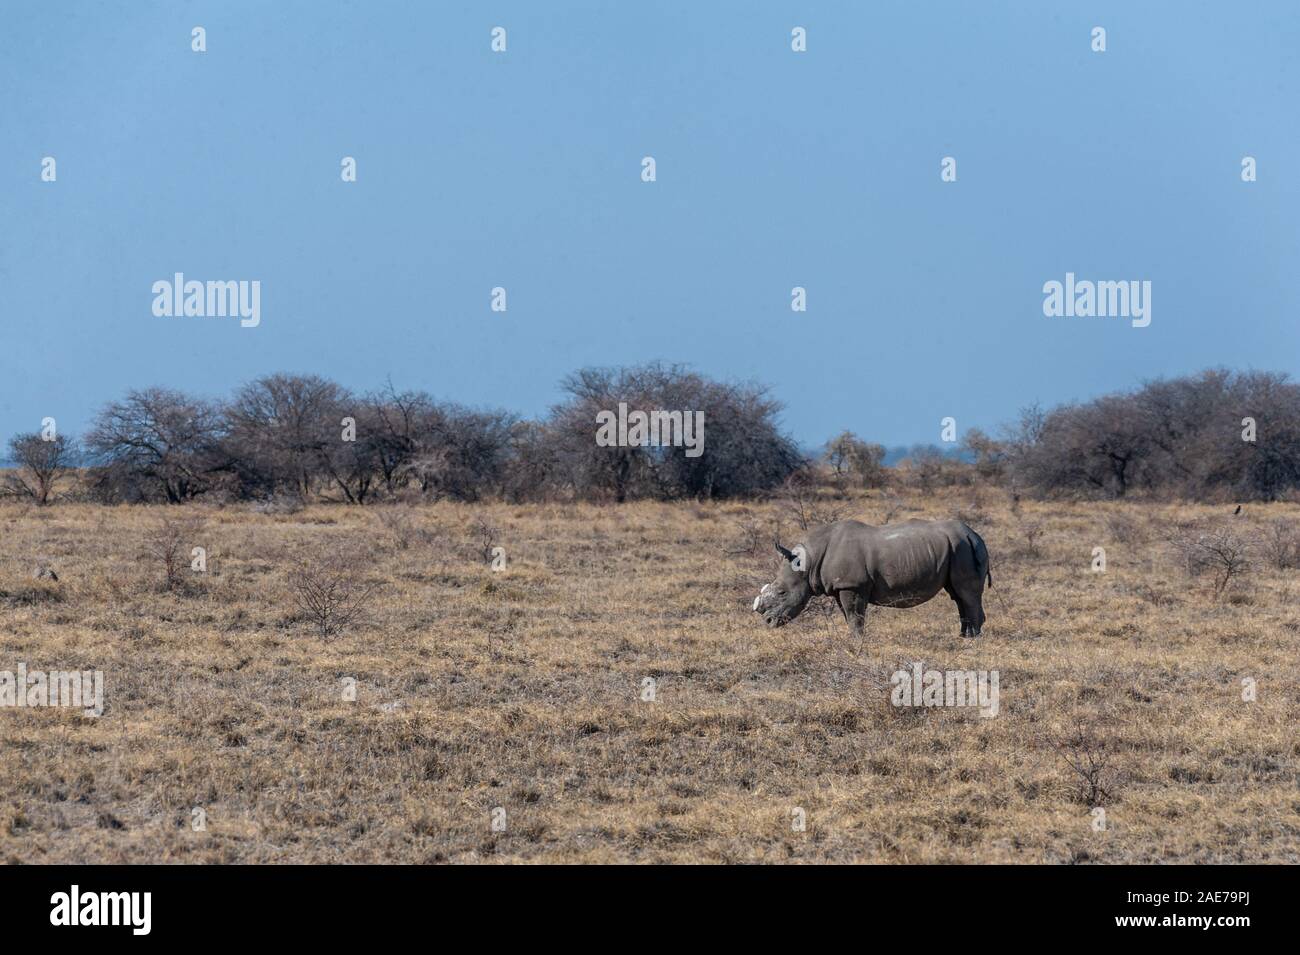 A solitary dehorned Black Rhinoceros - Diceros bicornis occidentalis- grazing in Etosha National Park, Namibia. Black Rhinos are critically endangered due to poaching. Their horn is removed in order to stop the poachers from killing the animal. Stock Photo